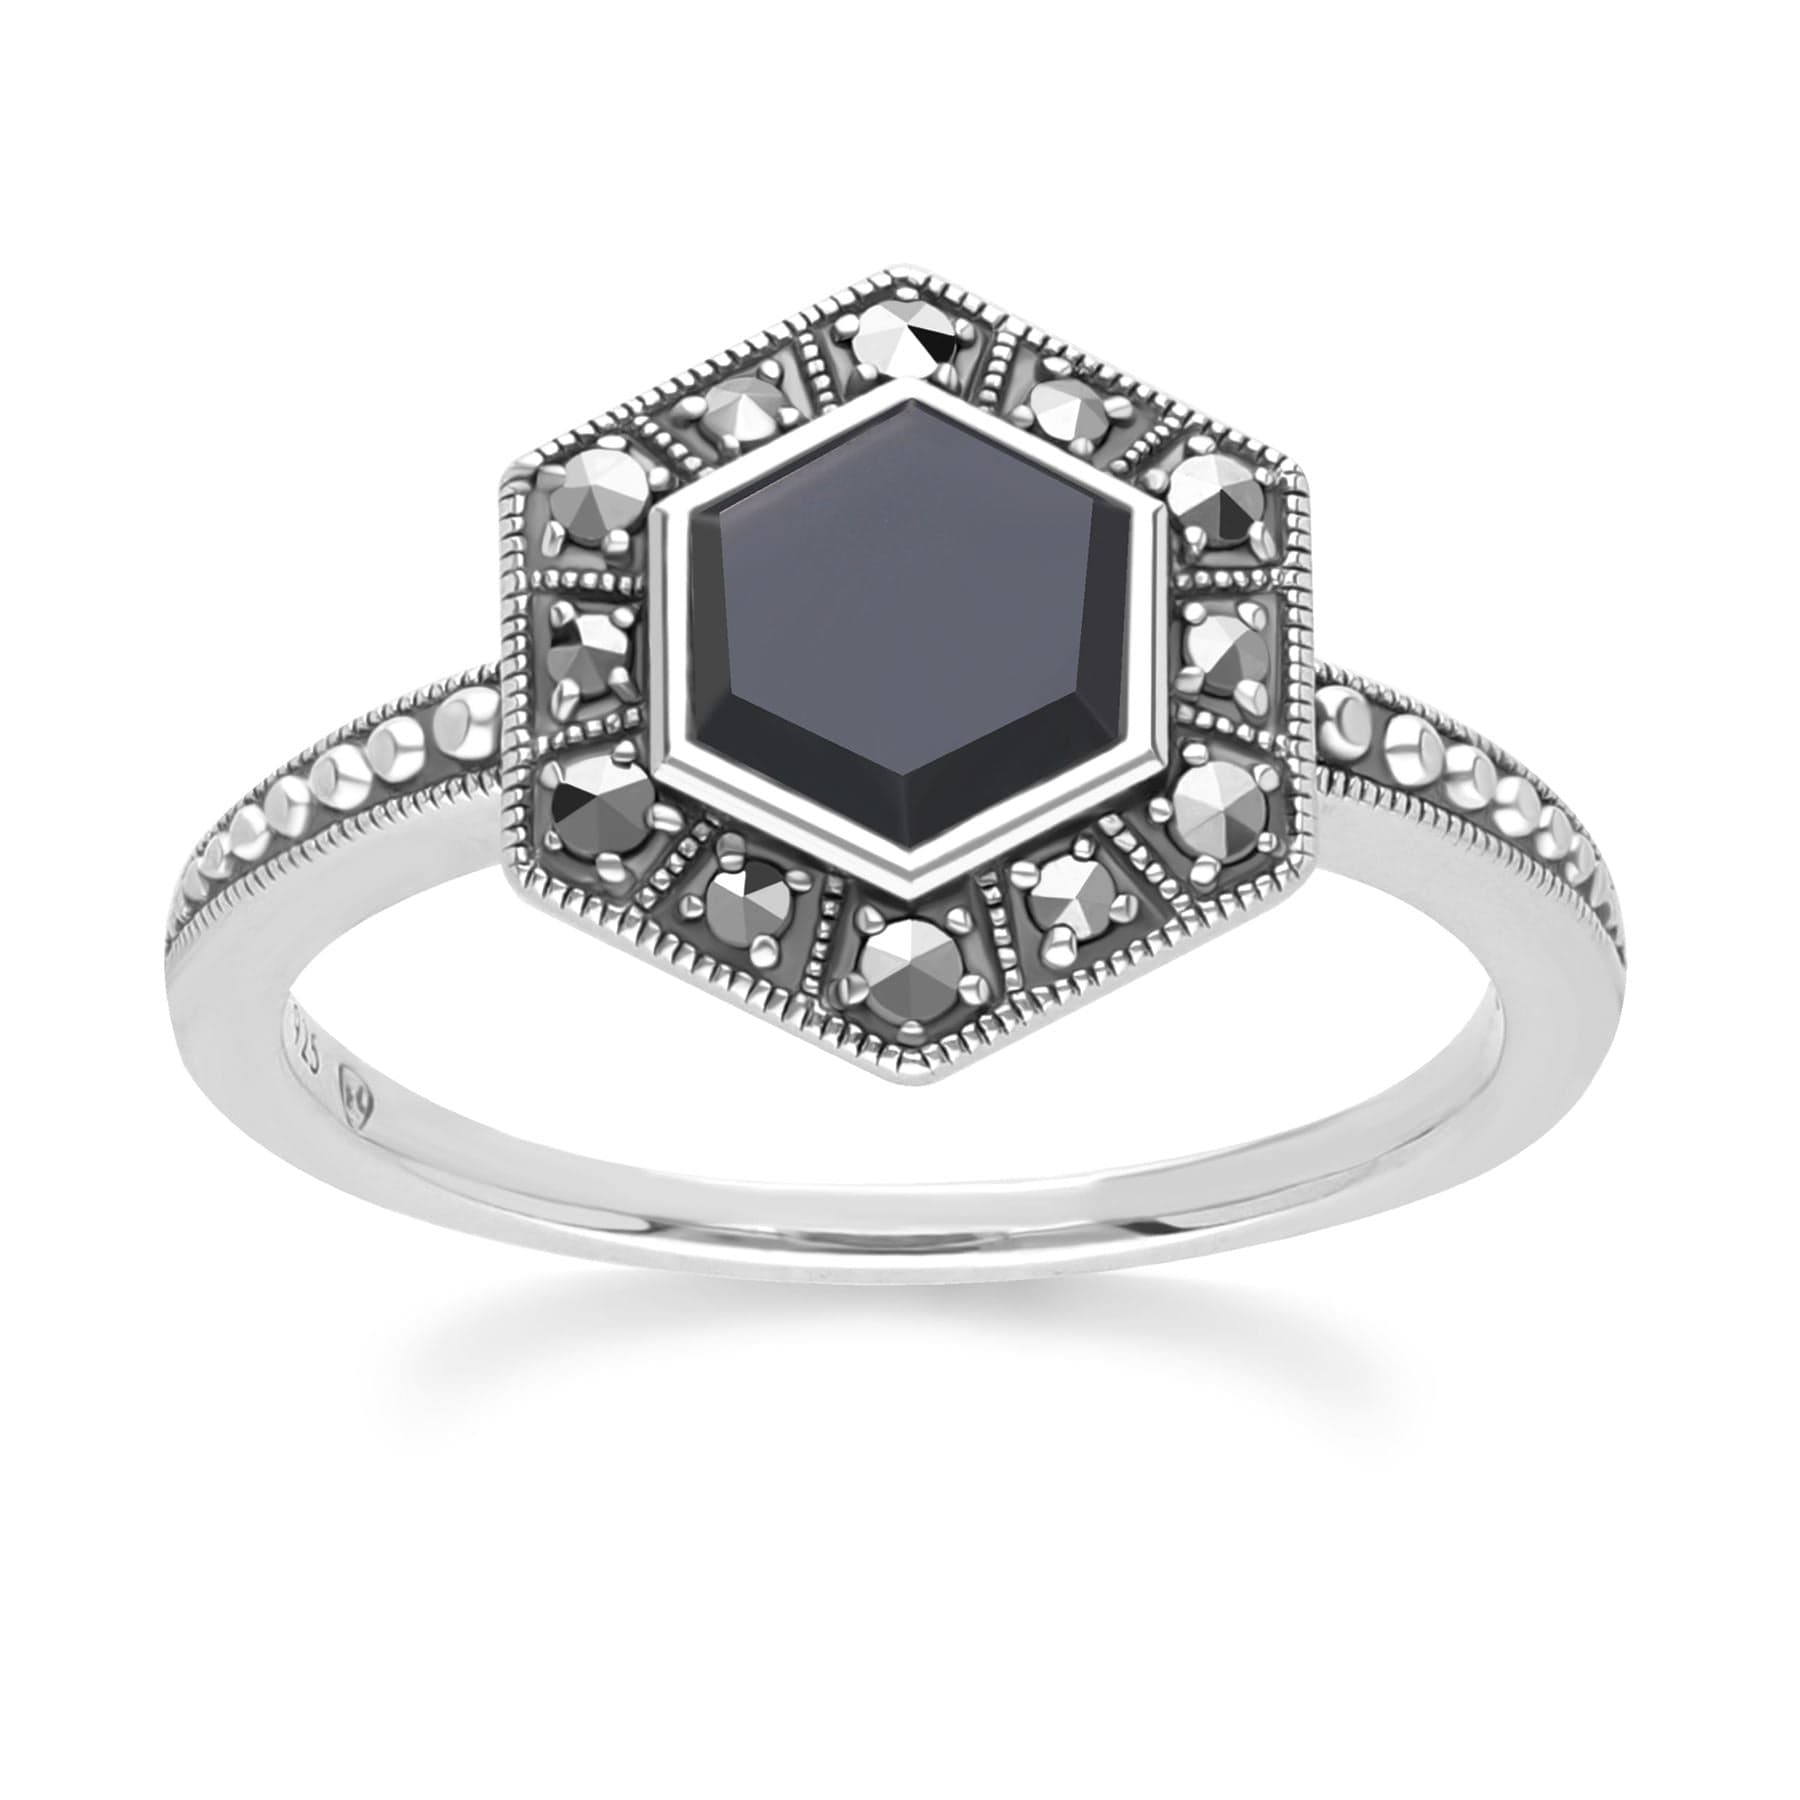 Art Deco Style Hexagon Onyx and Marcasite Ring in Sterling Silver 214R641802925 